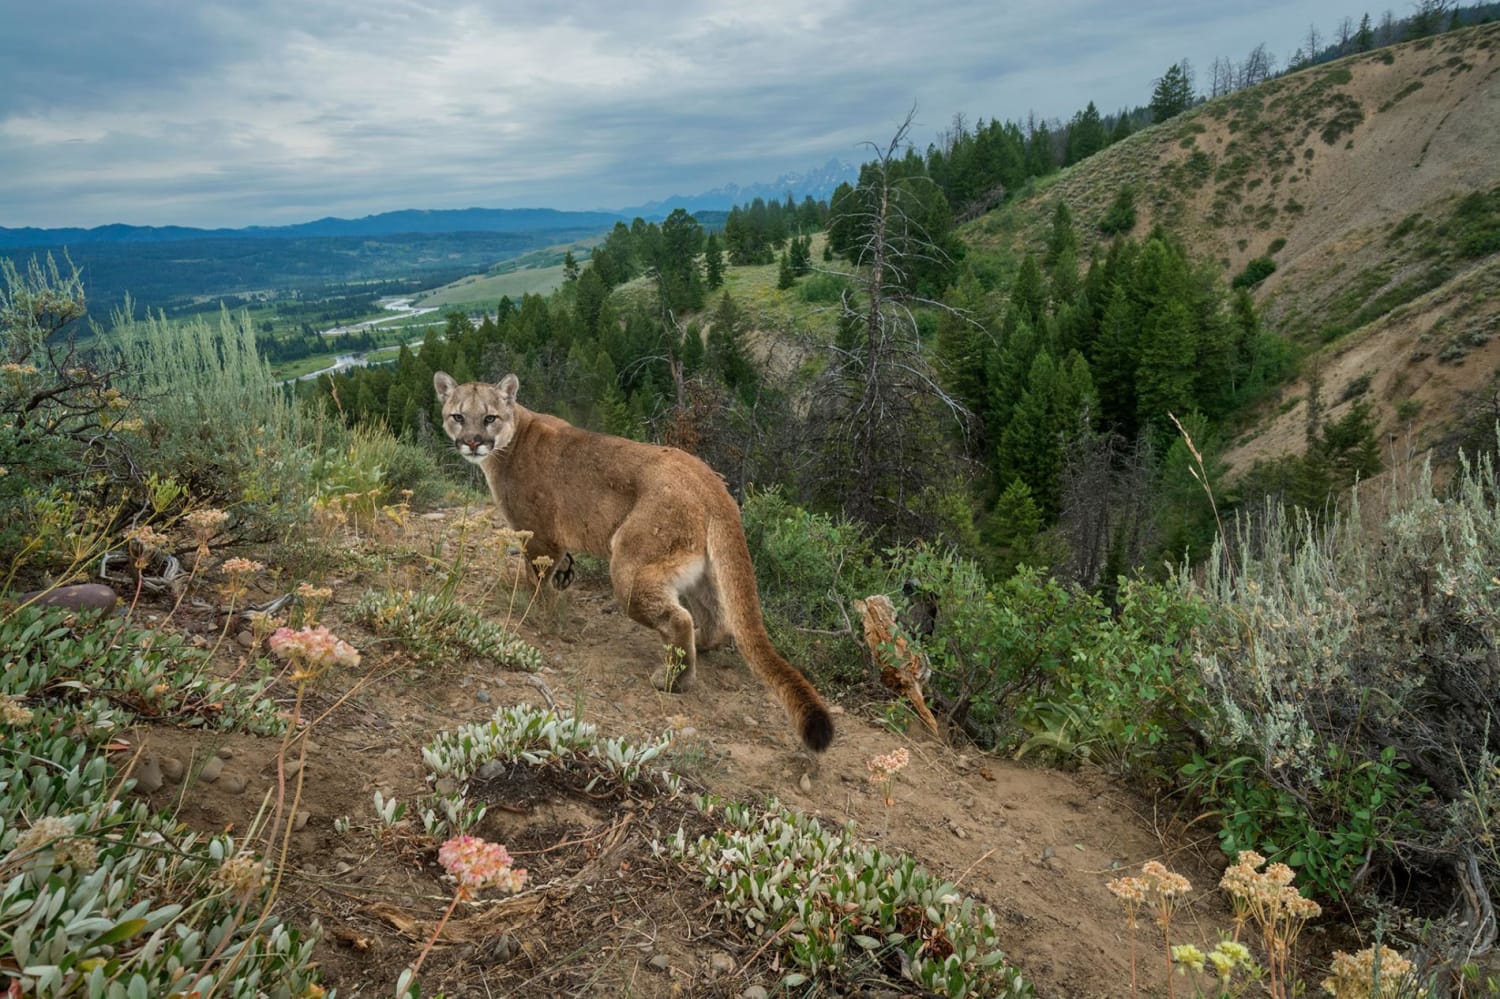 Cougar or not? Why we think we see big cats in our backyards.